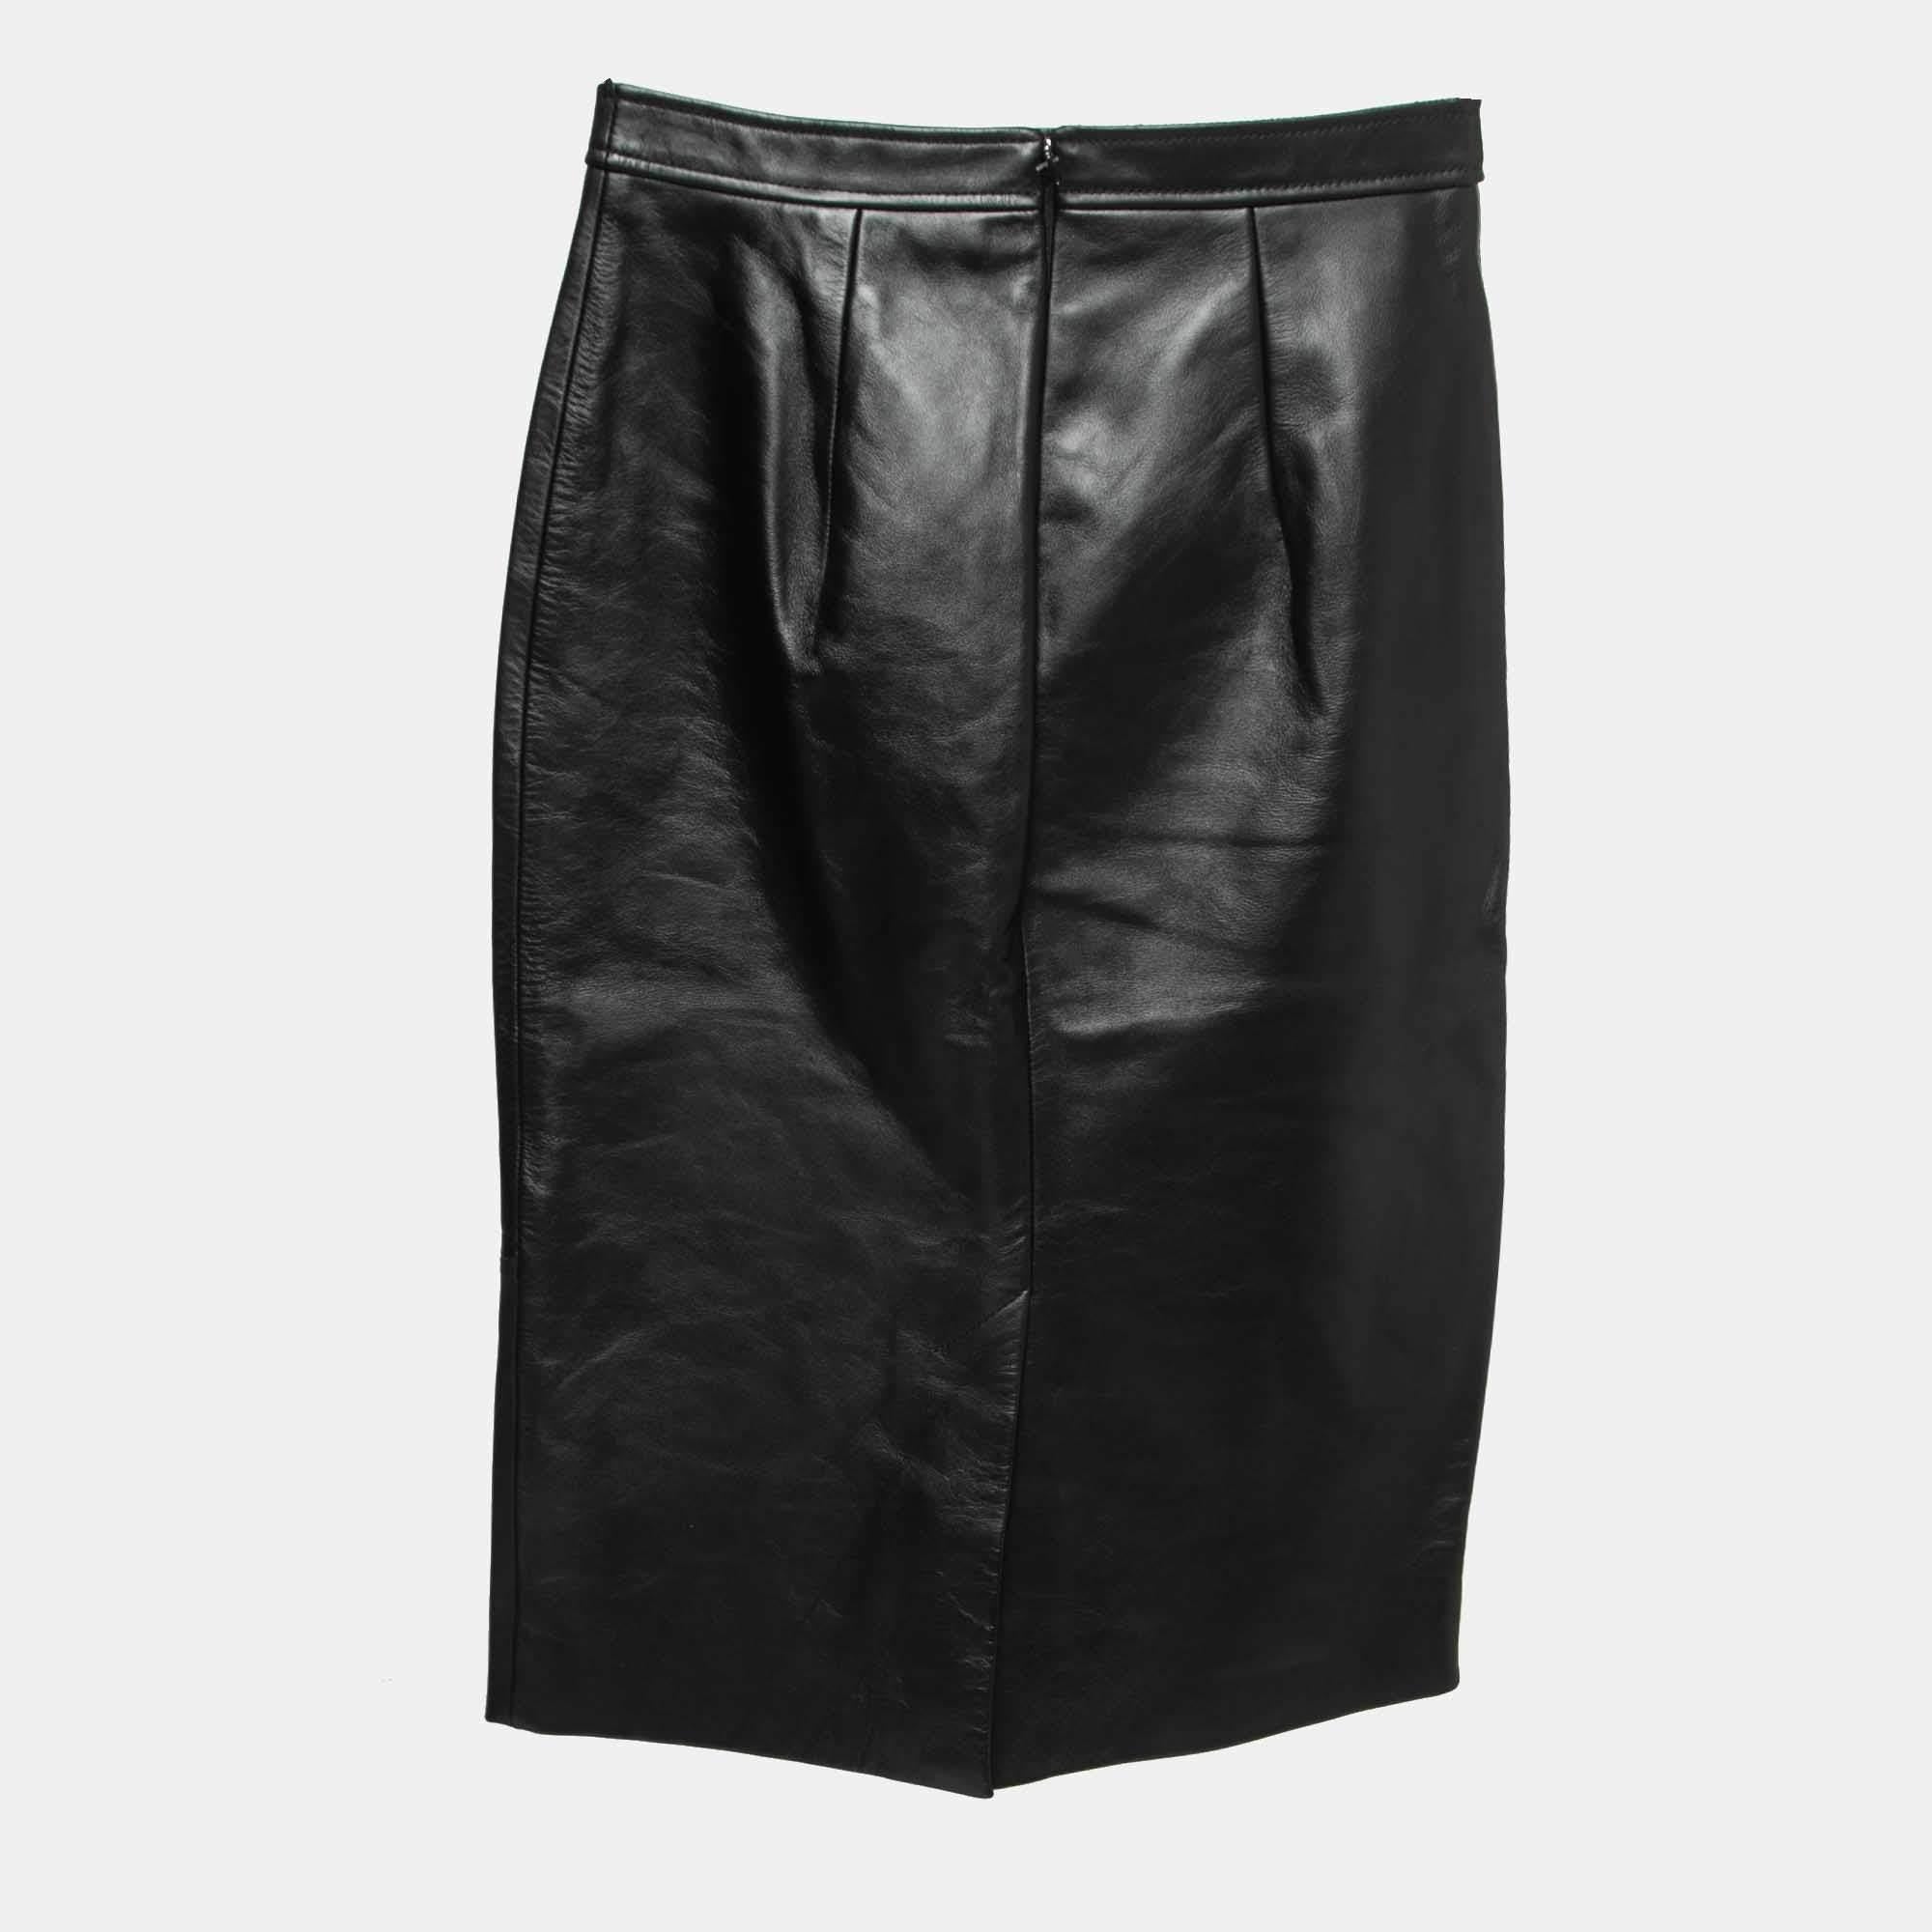 This elegant Burberry skirt is worth adding to your closet! Crafted from fine materials, it is exquisitely designed into a flattering shape.

Includes: Tag
